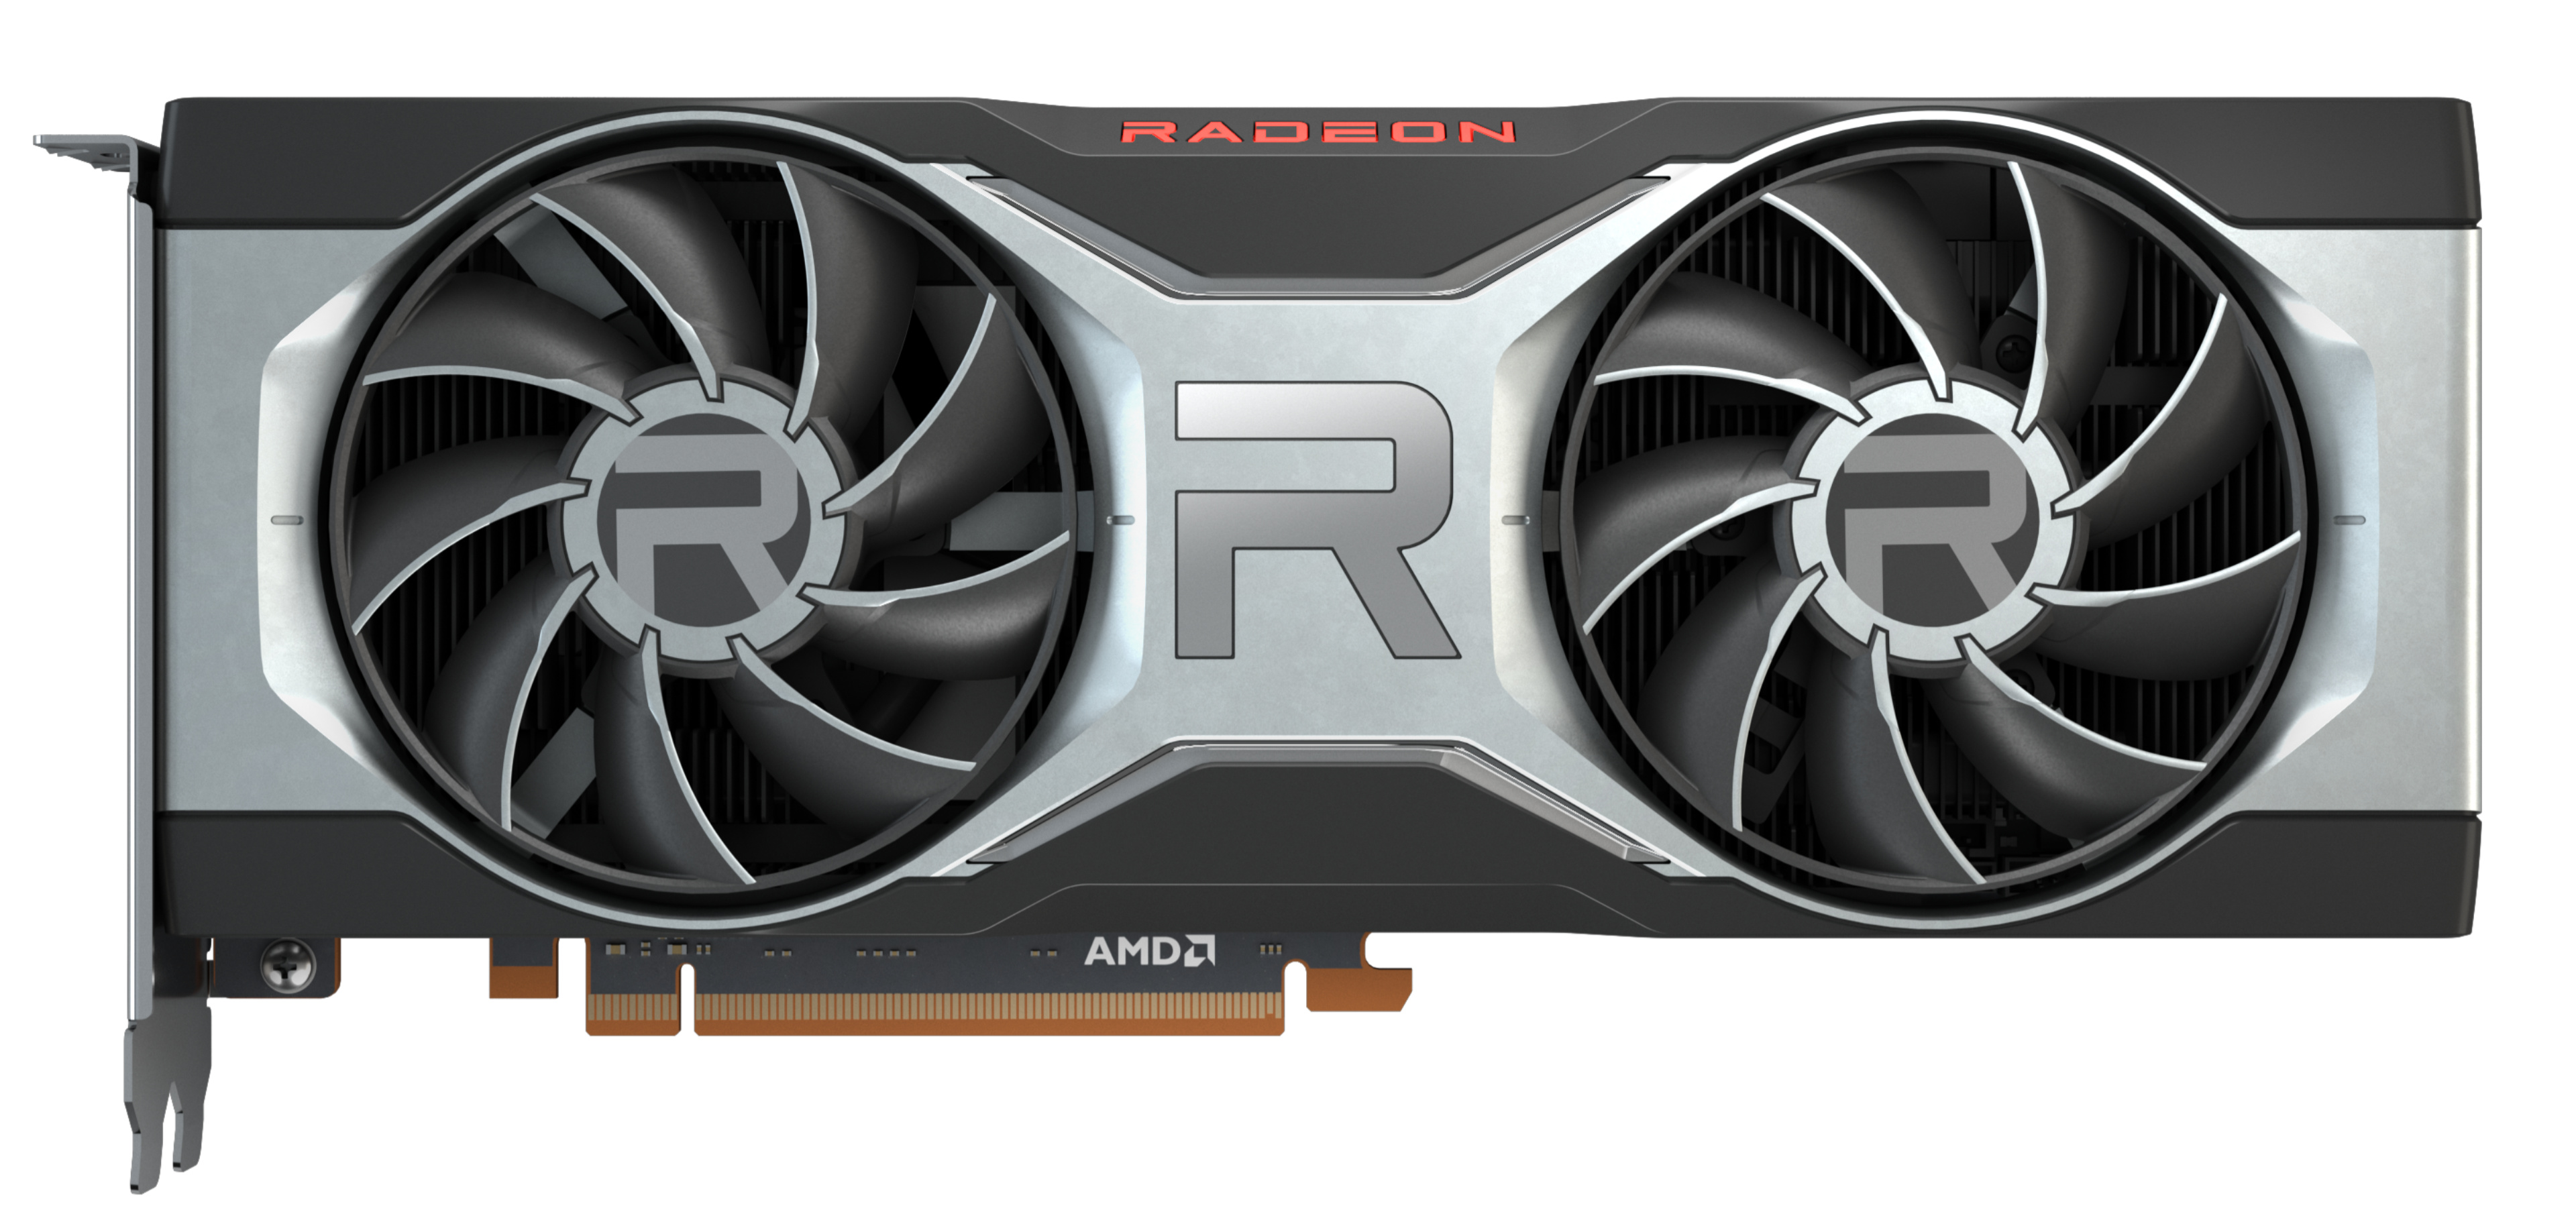 The New Mid Range The Amd Radeon Rx 6700 Xt Desktop Gpu Is Equipped With 12 Gb Of Vram Notebookcheck Net Reviews